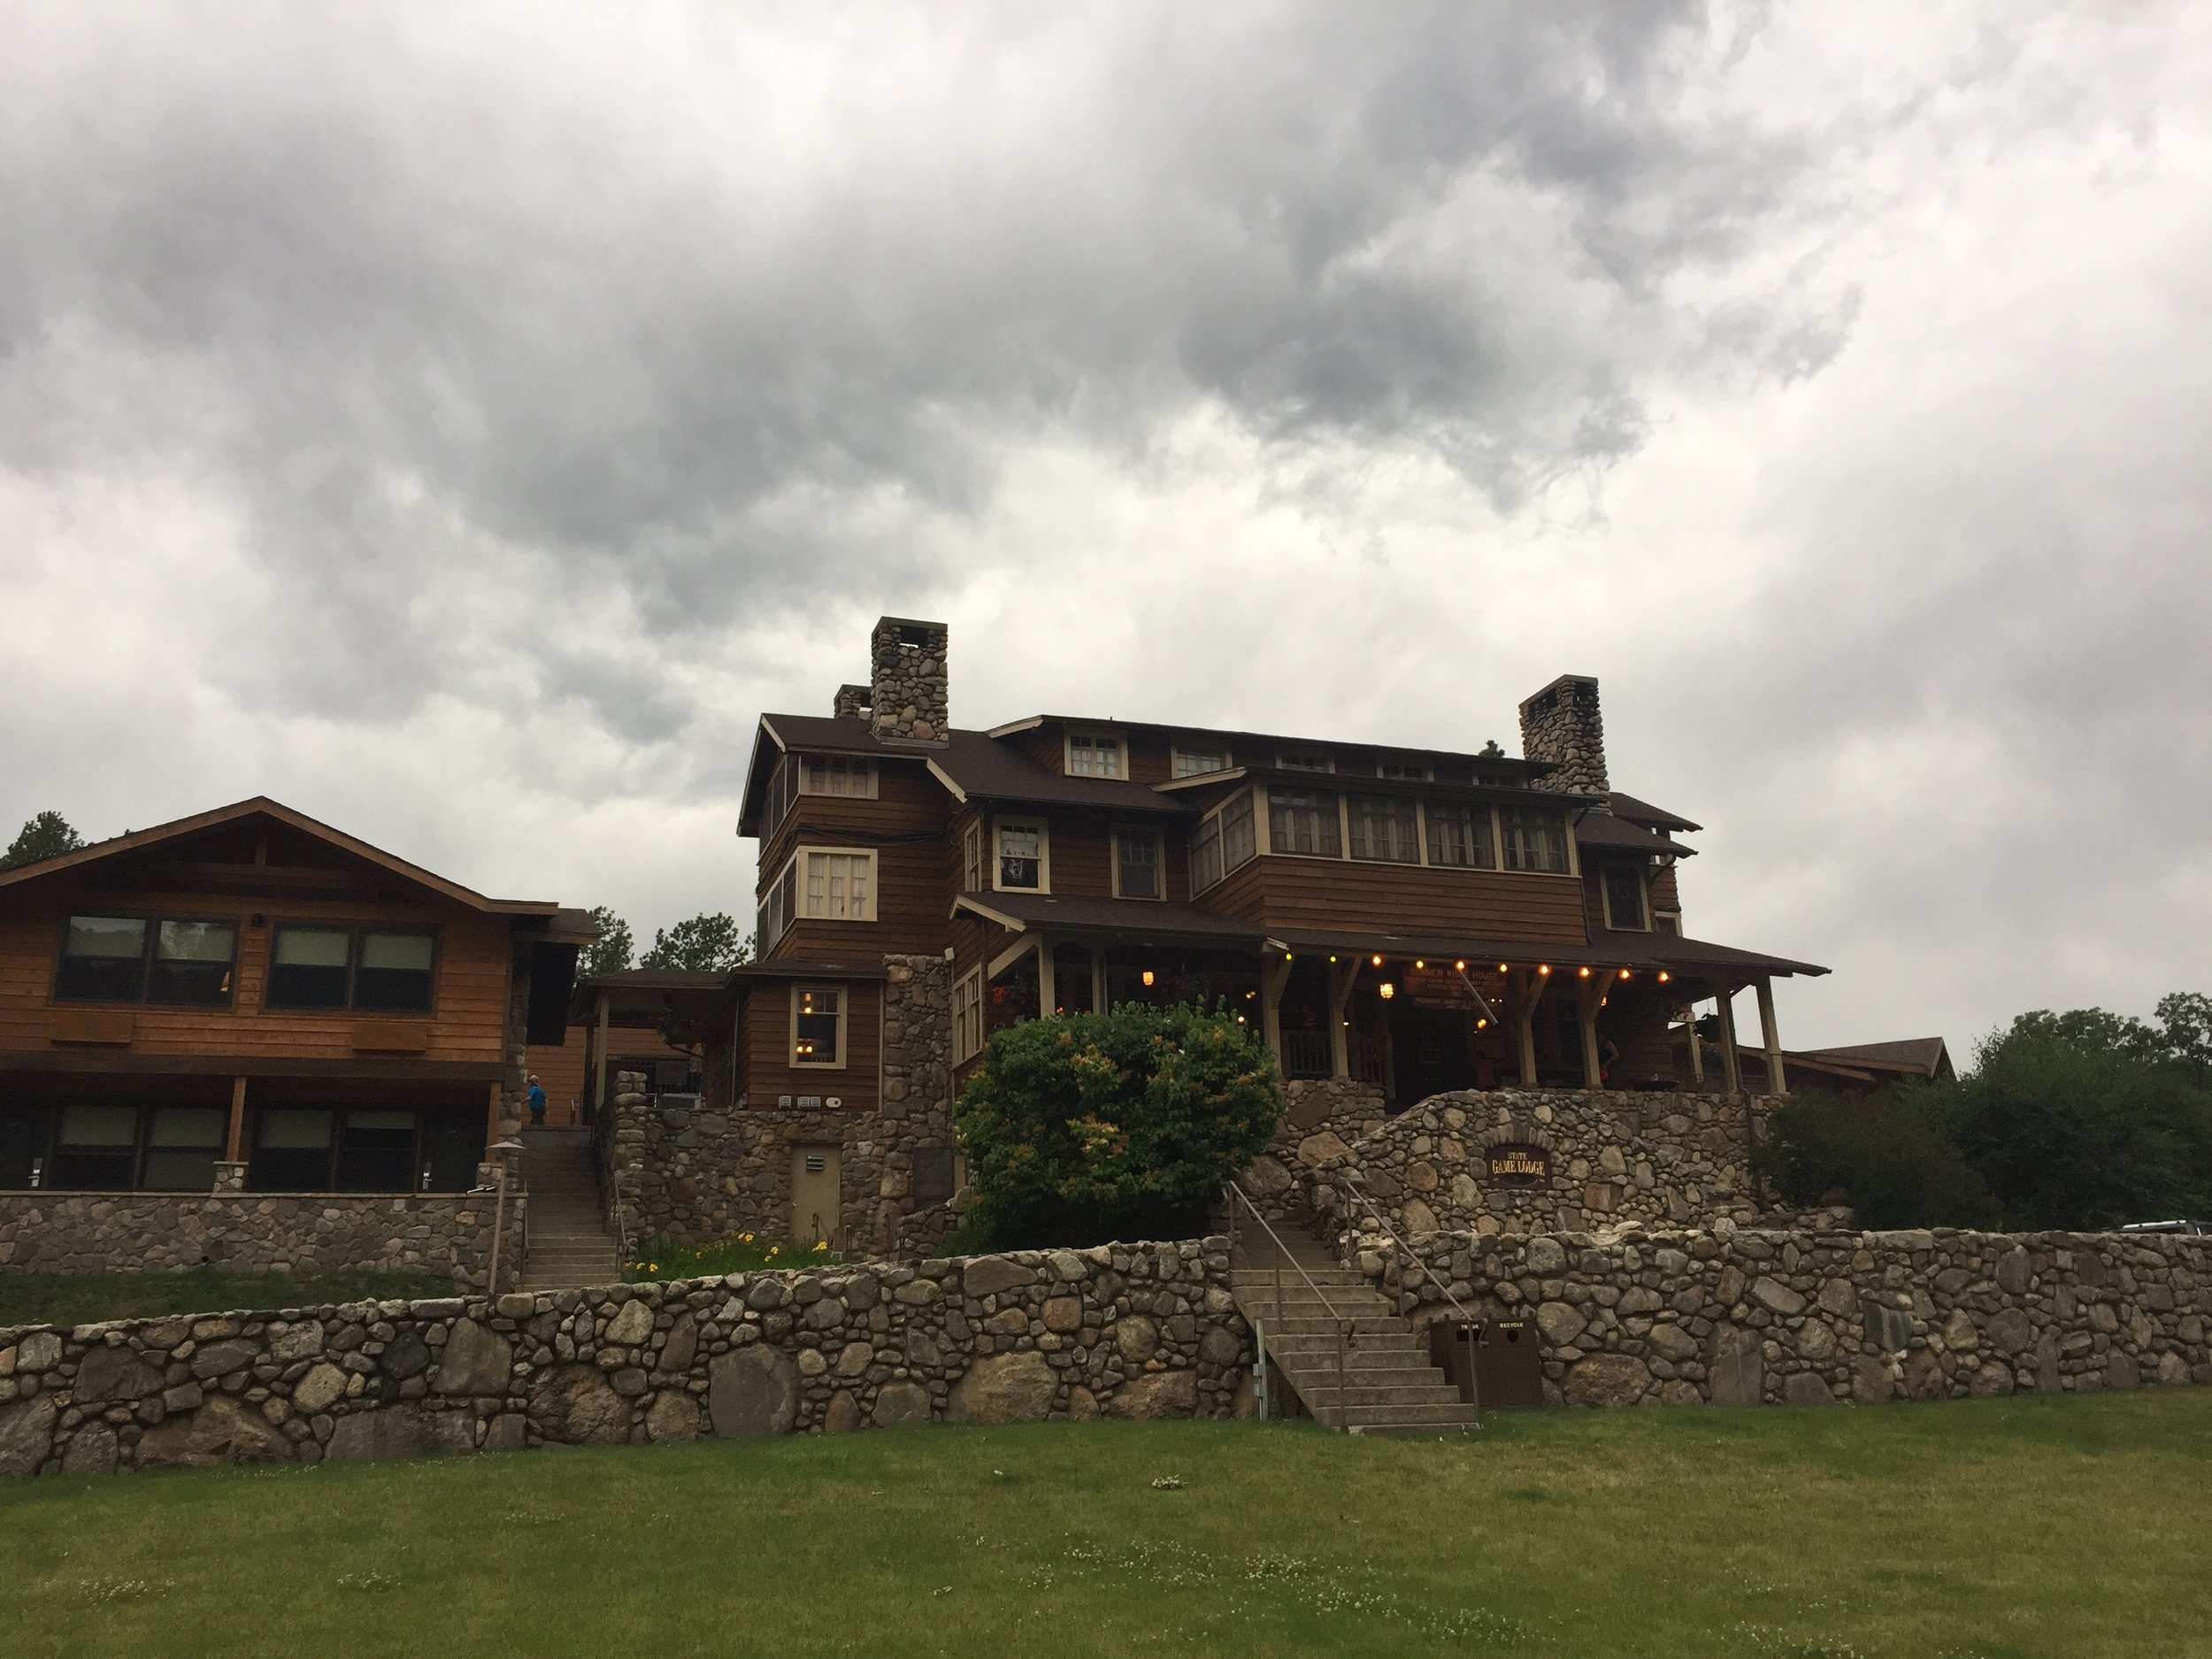  State Game Lodge in Custer State Park was built in 1920 and served as a Summer White House to a couple of U.S. Presidents. 